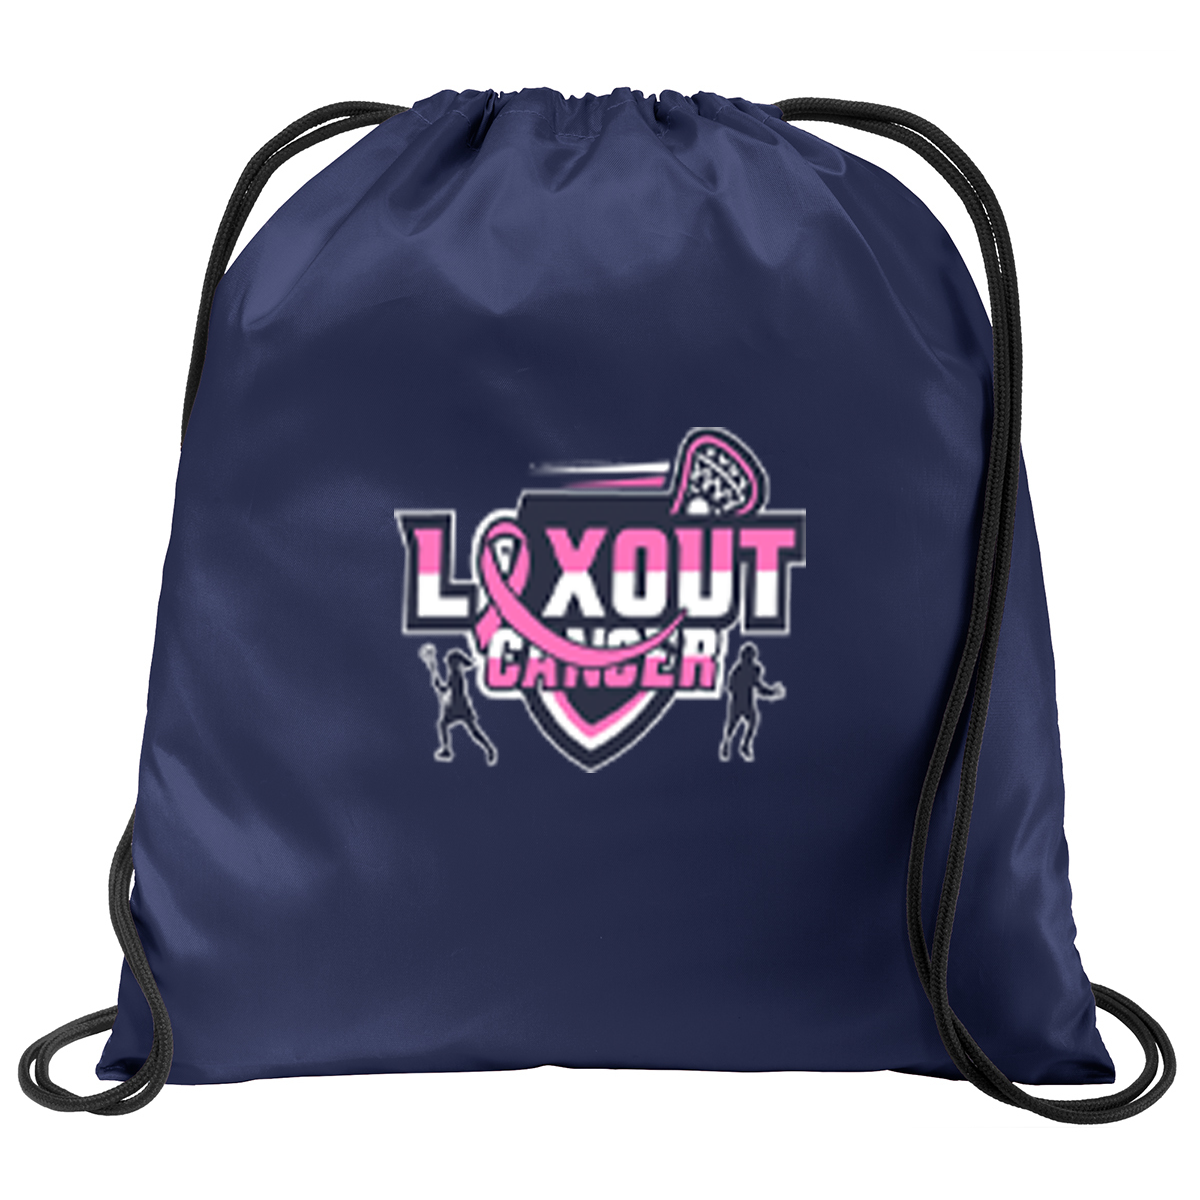 LaxOut Cancer Cinch Pack